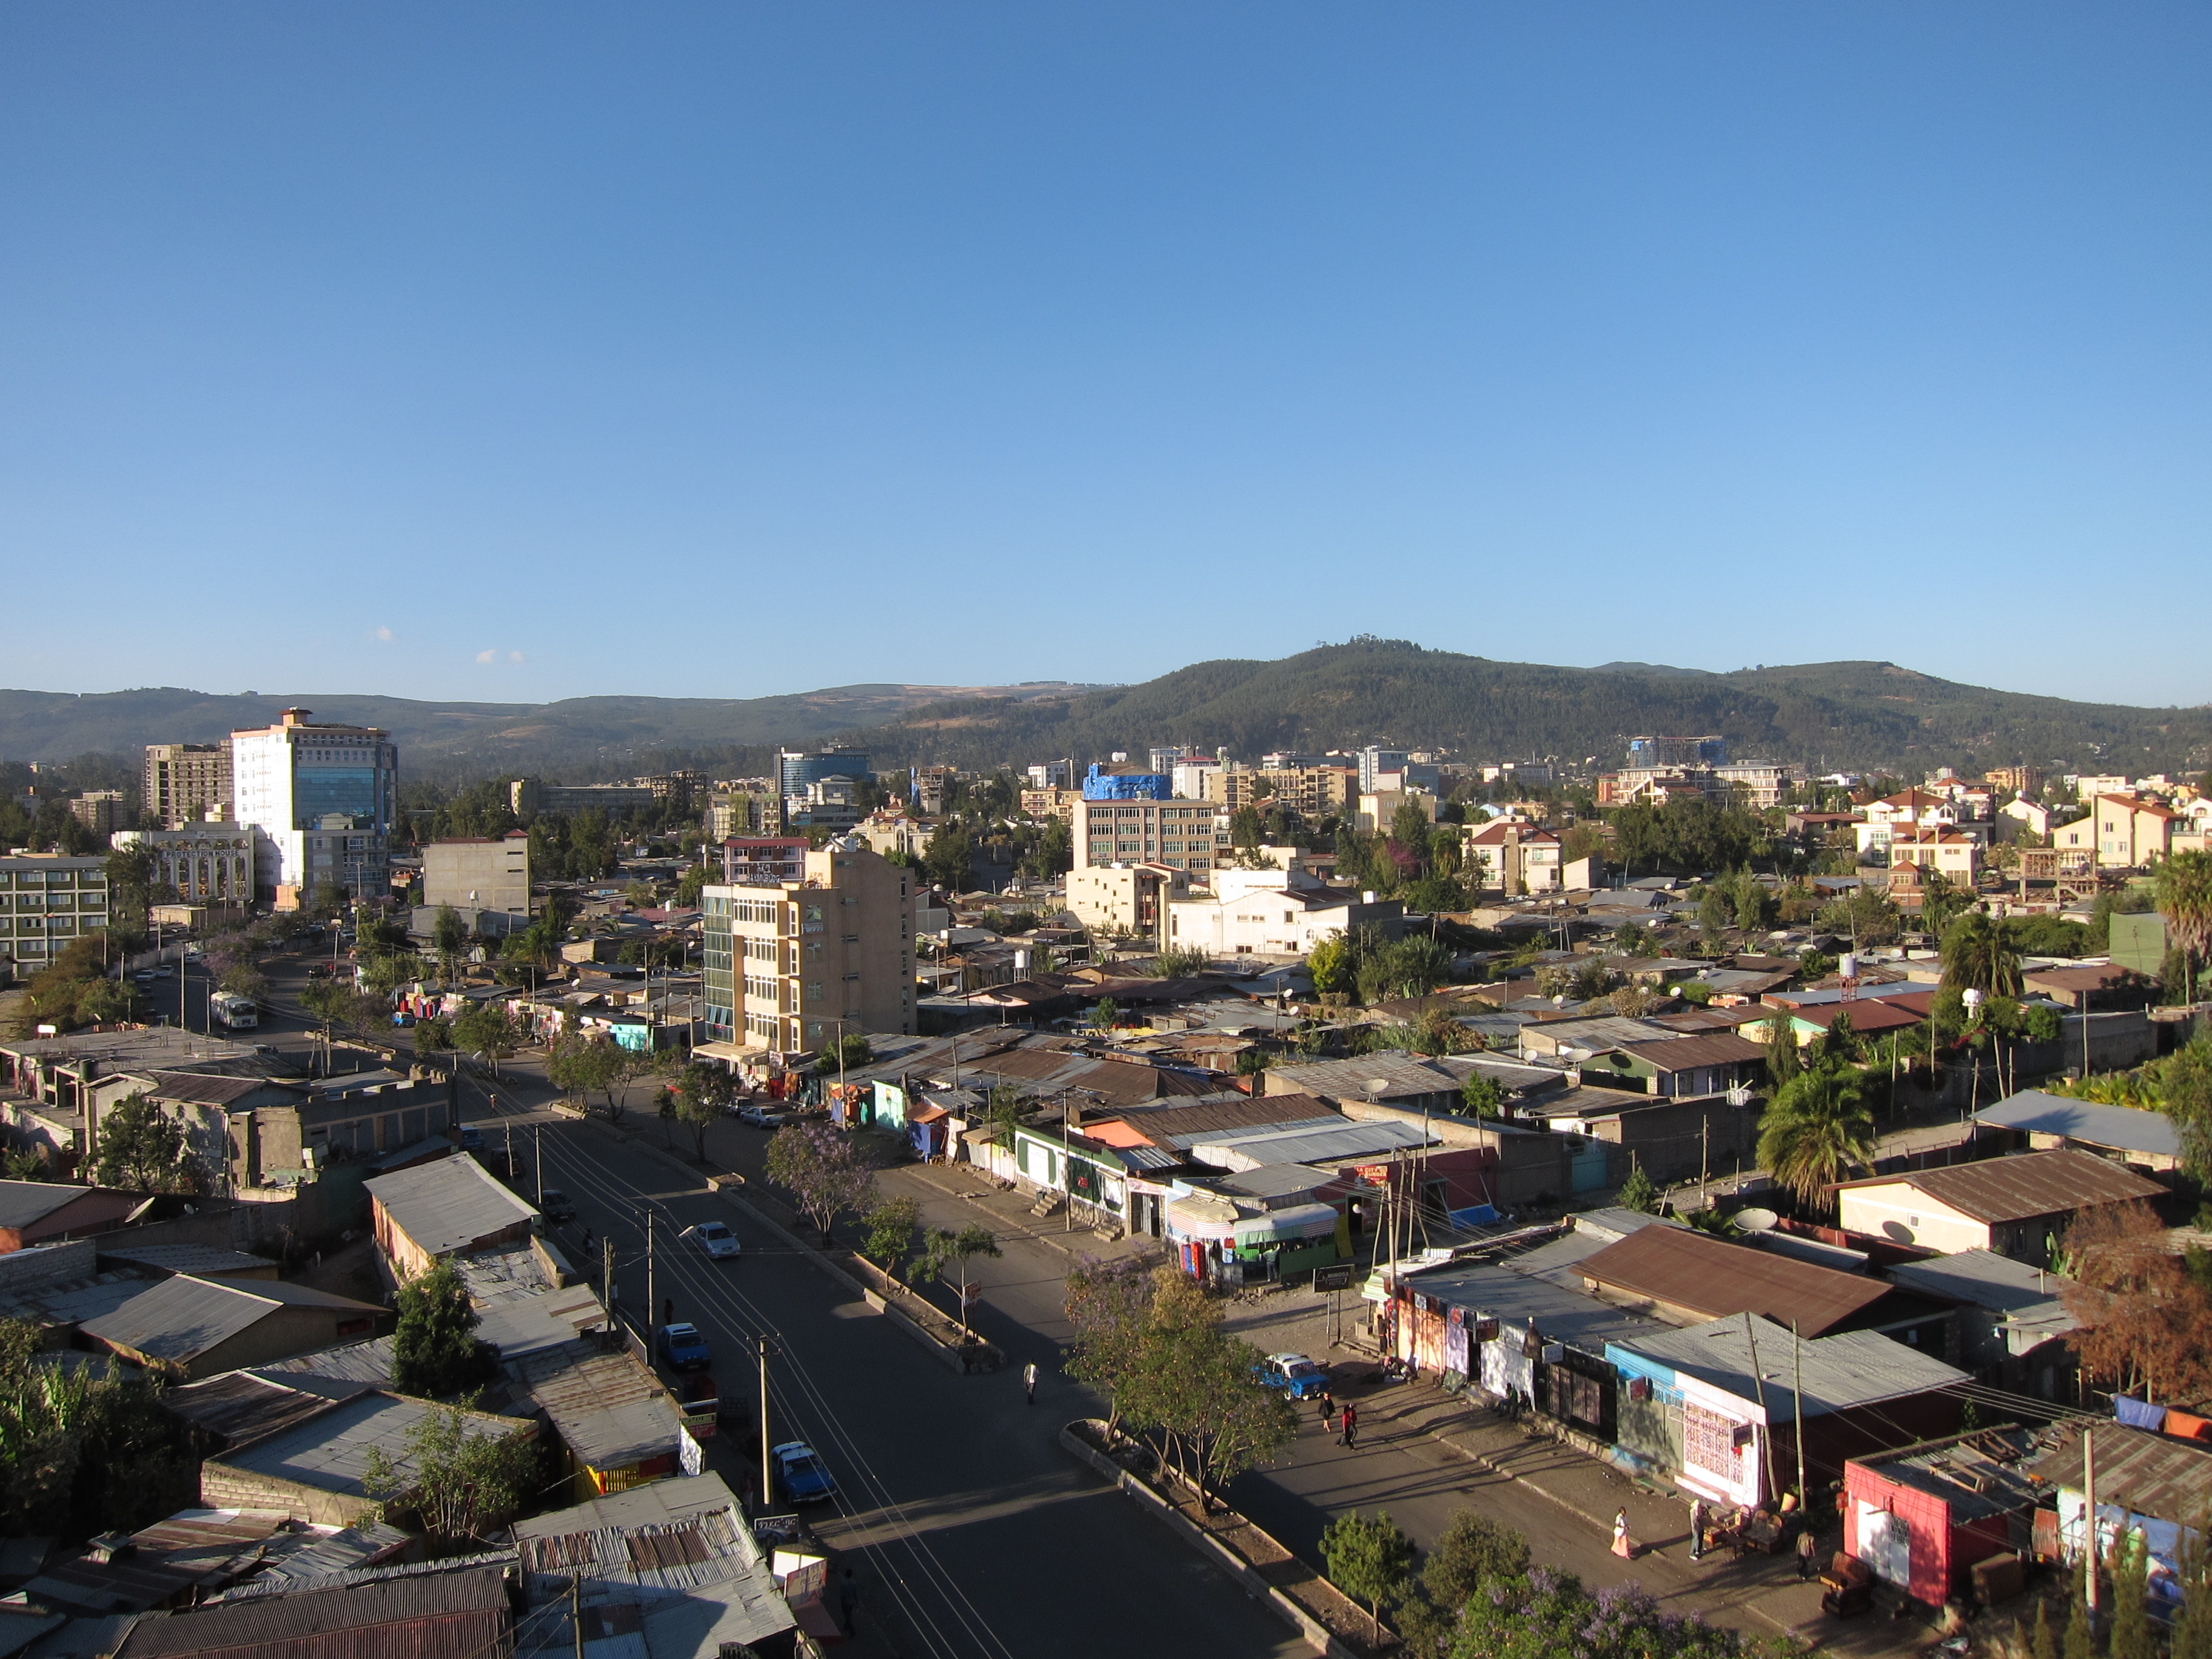 View over Addis Ababa city, showing buildings and roads, with the mountains in the background.